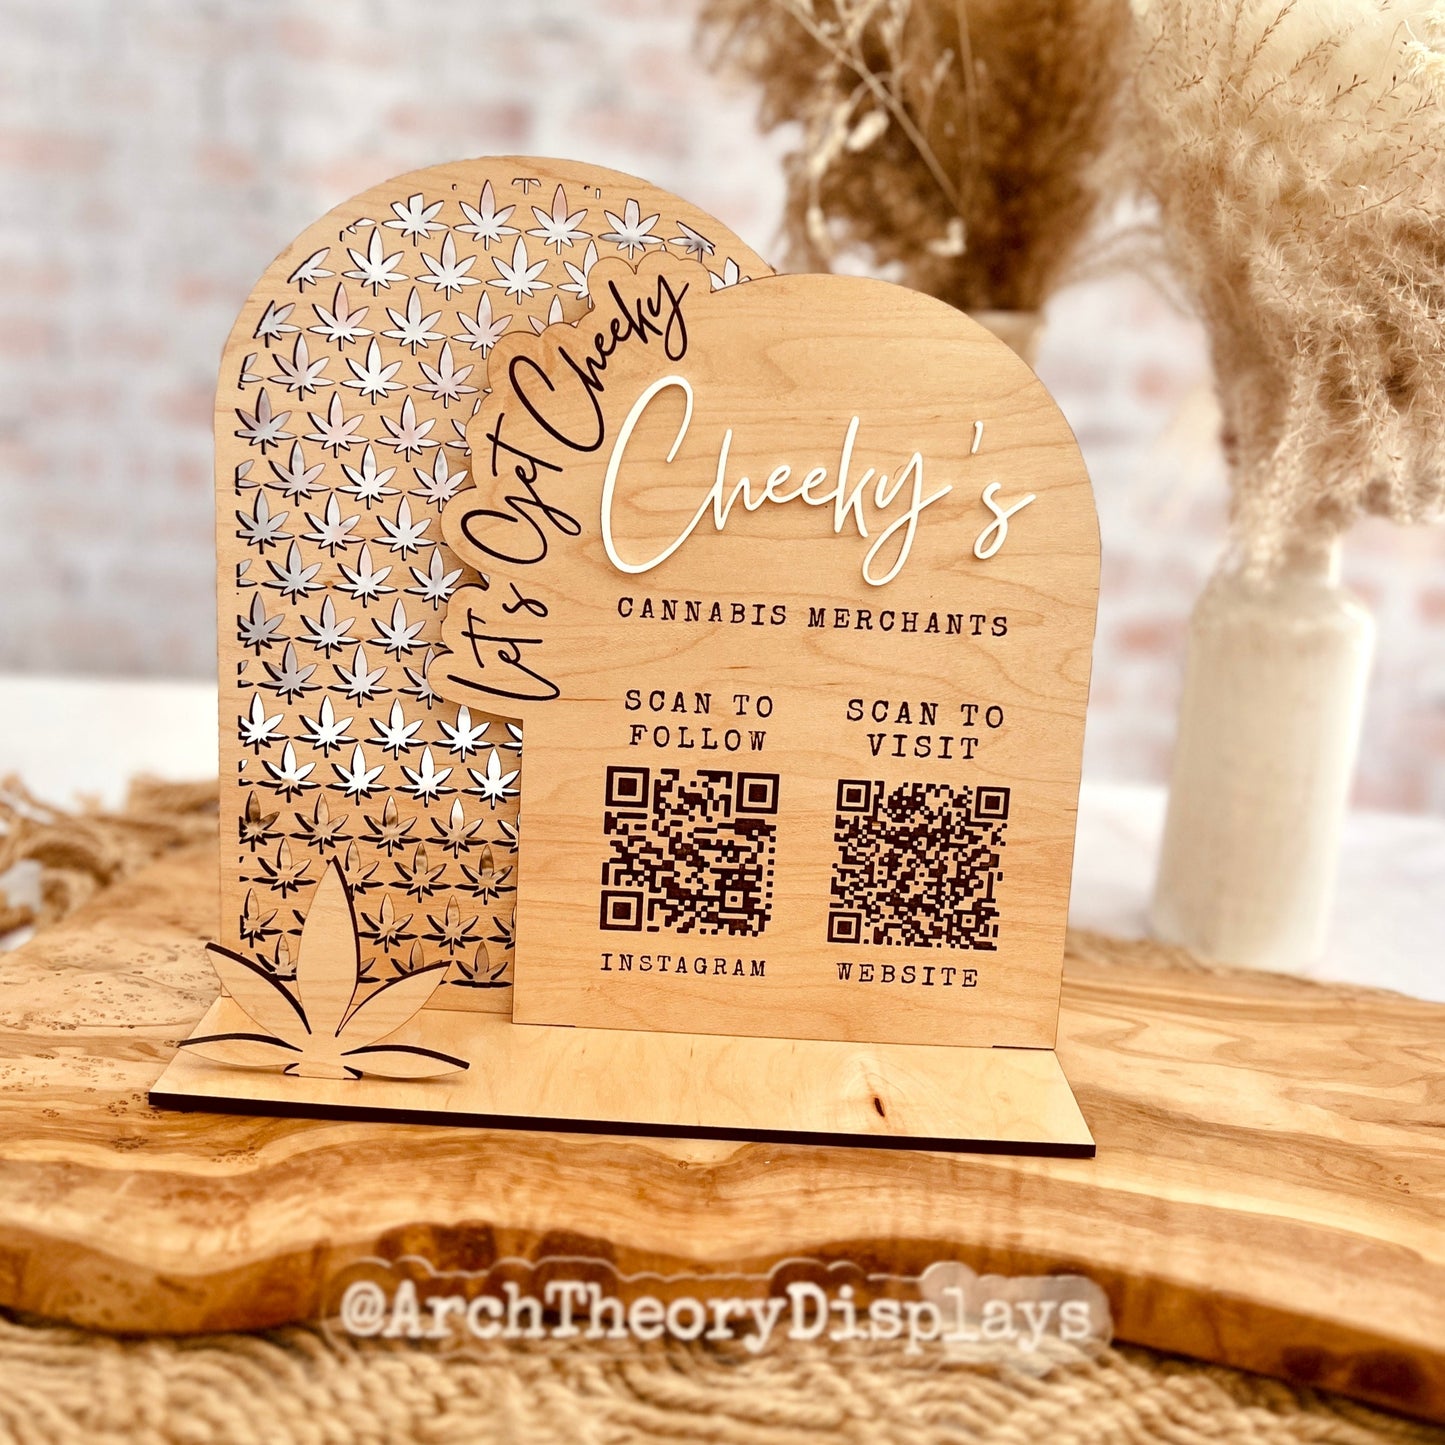 Custom Engraved 10" Double Arch Business Logo + QR Code Sign